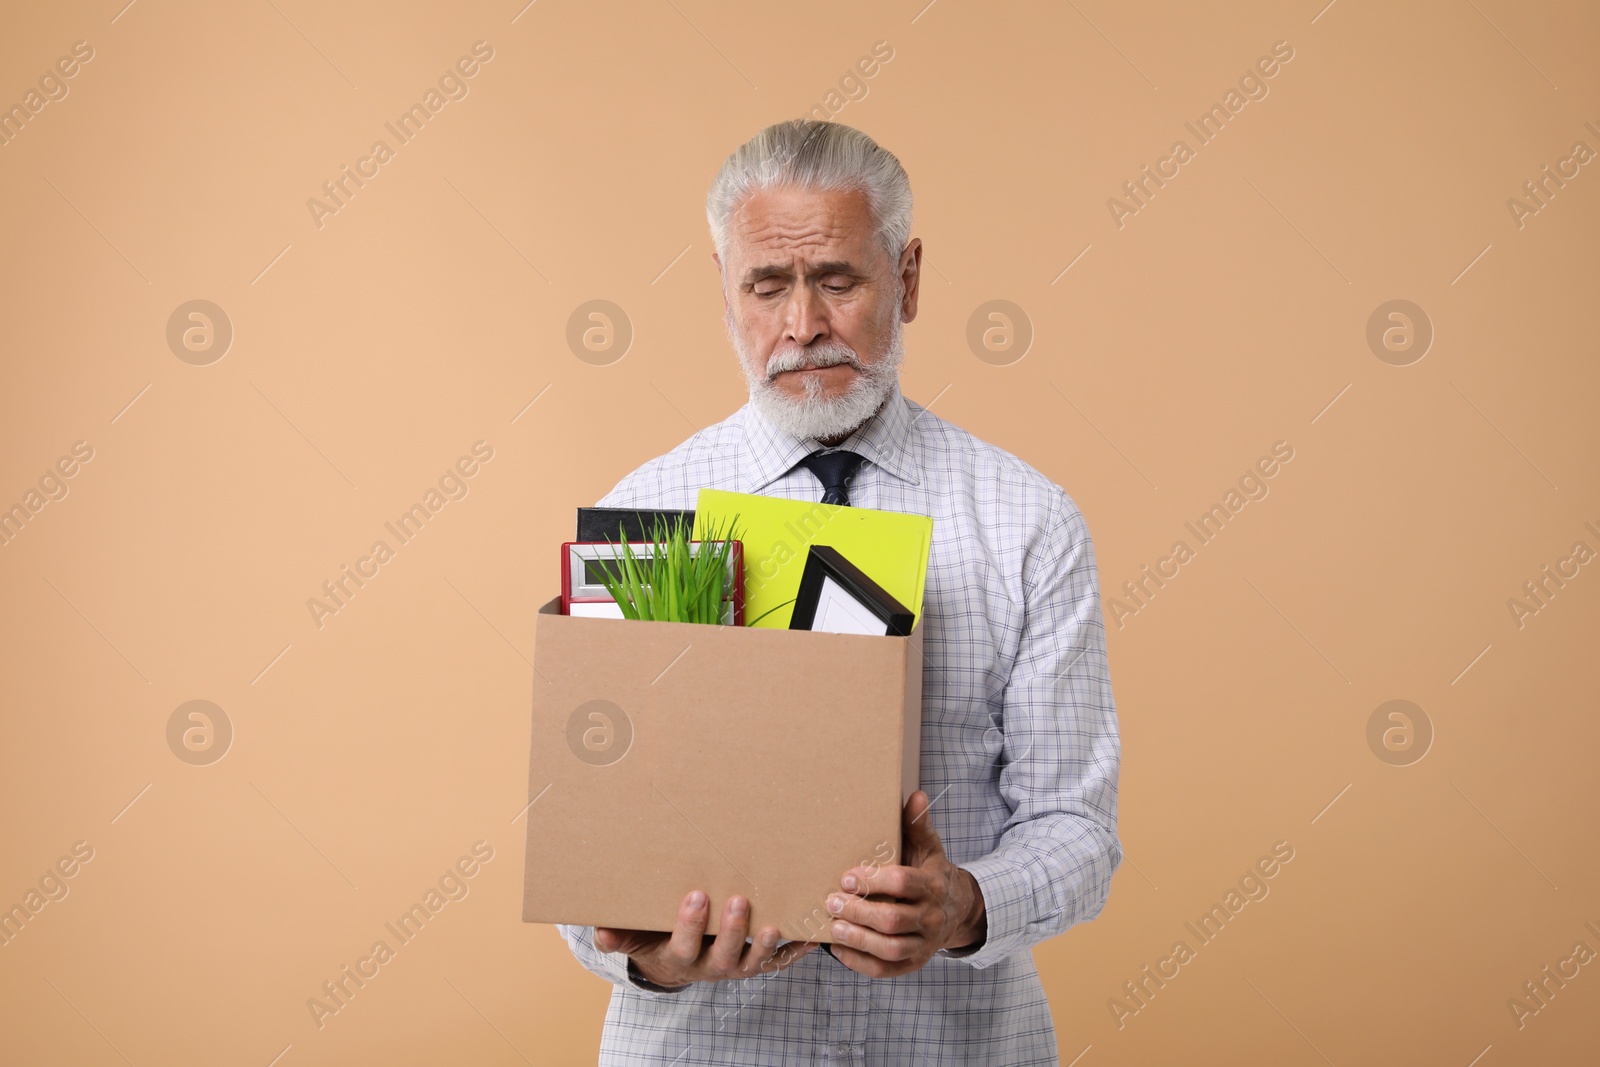 Photo of Unemployed senior man with box of personal office belongings on beige background